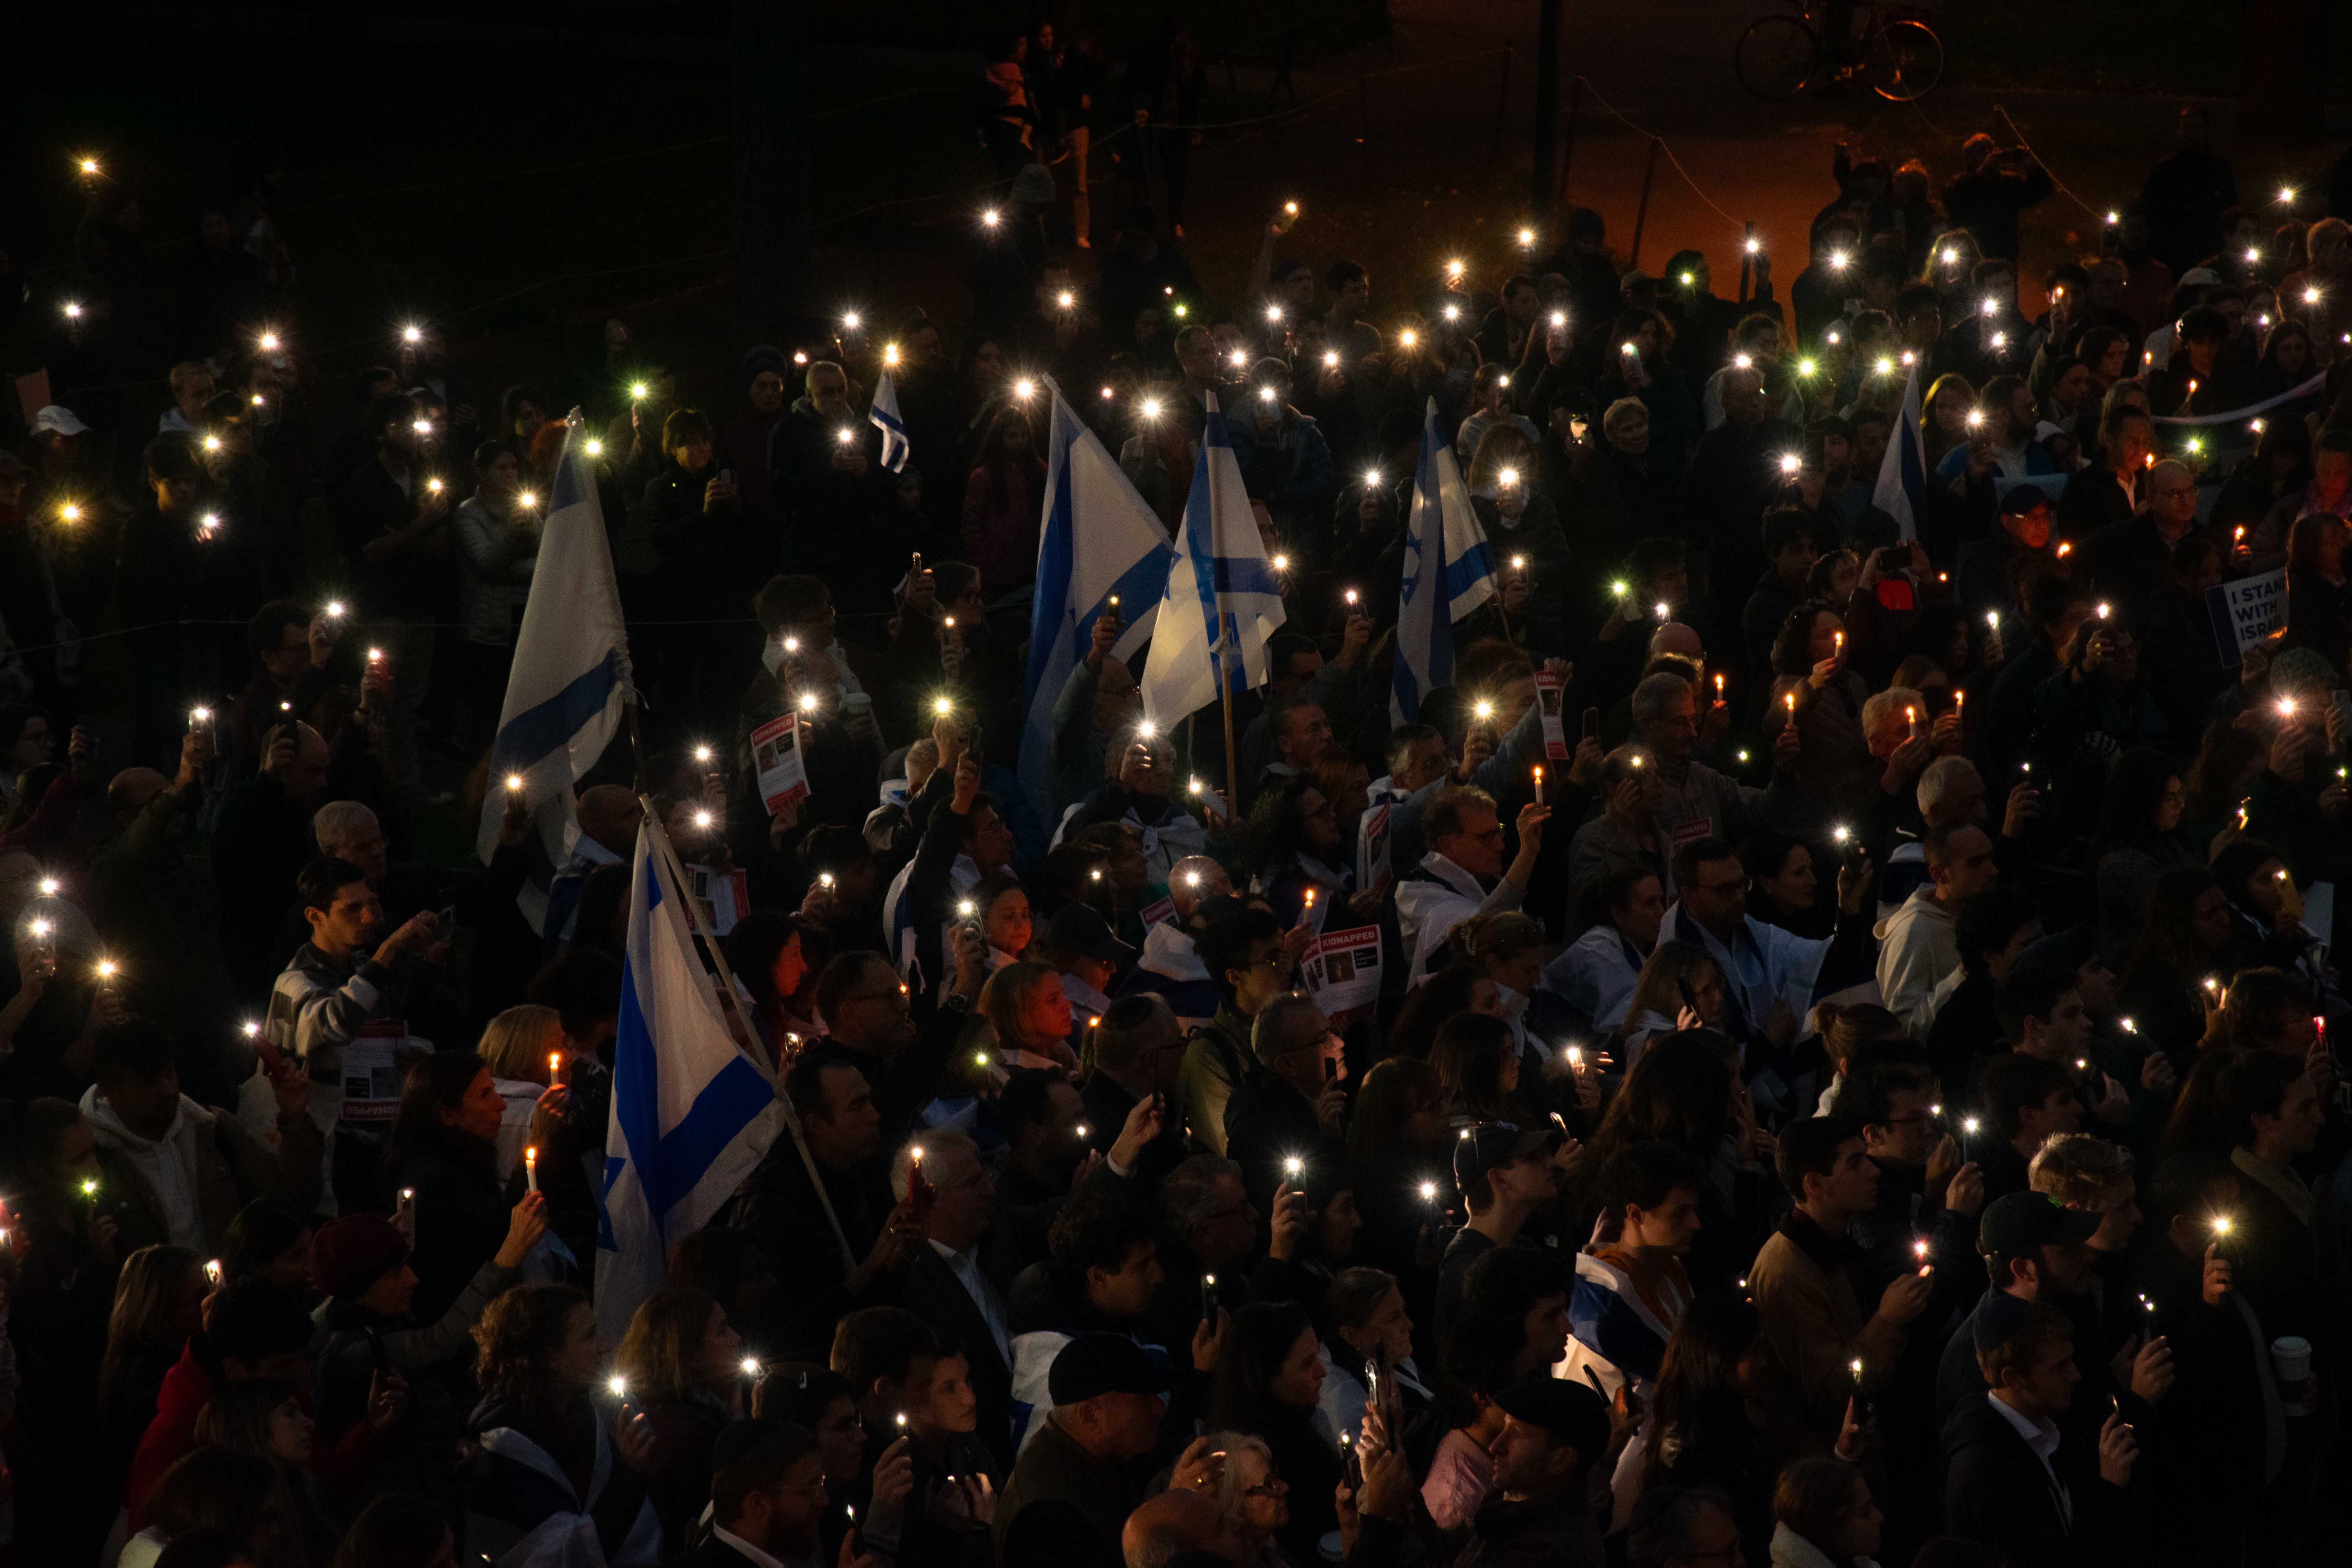 More than 1,000 people gather by the steps of Widener Library for a vigil to stand in solidarity with Israel and mourn the civilian deaths of the Oct. 7 attacks. The vigil was jointly organized by Harvard Hillel and Harvard Chabad, and included speeches, songs, and chants.